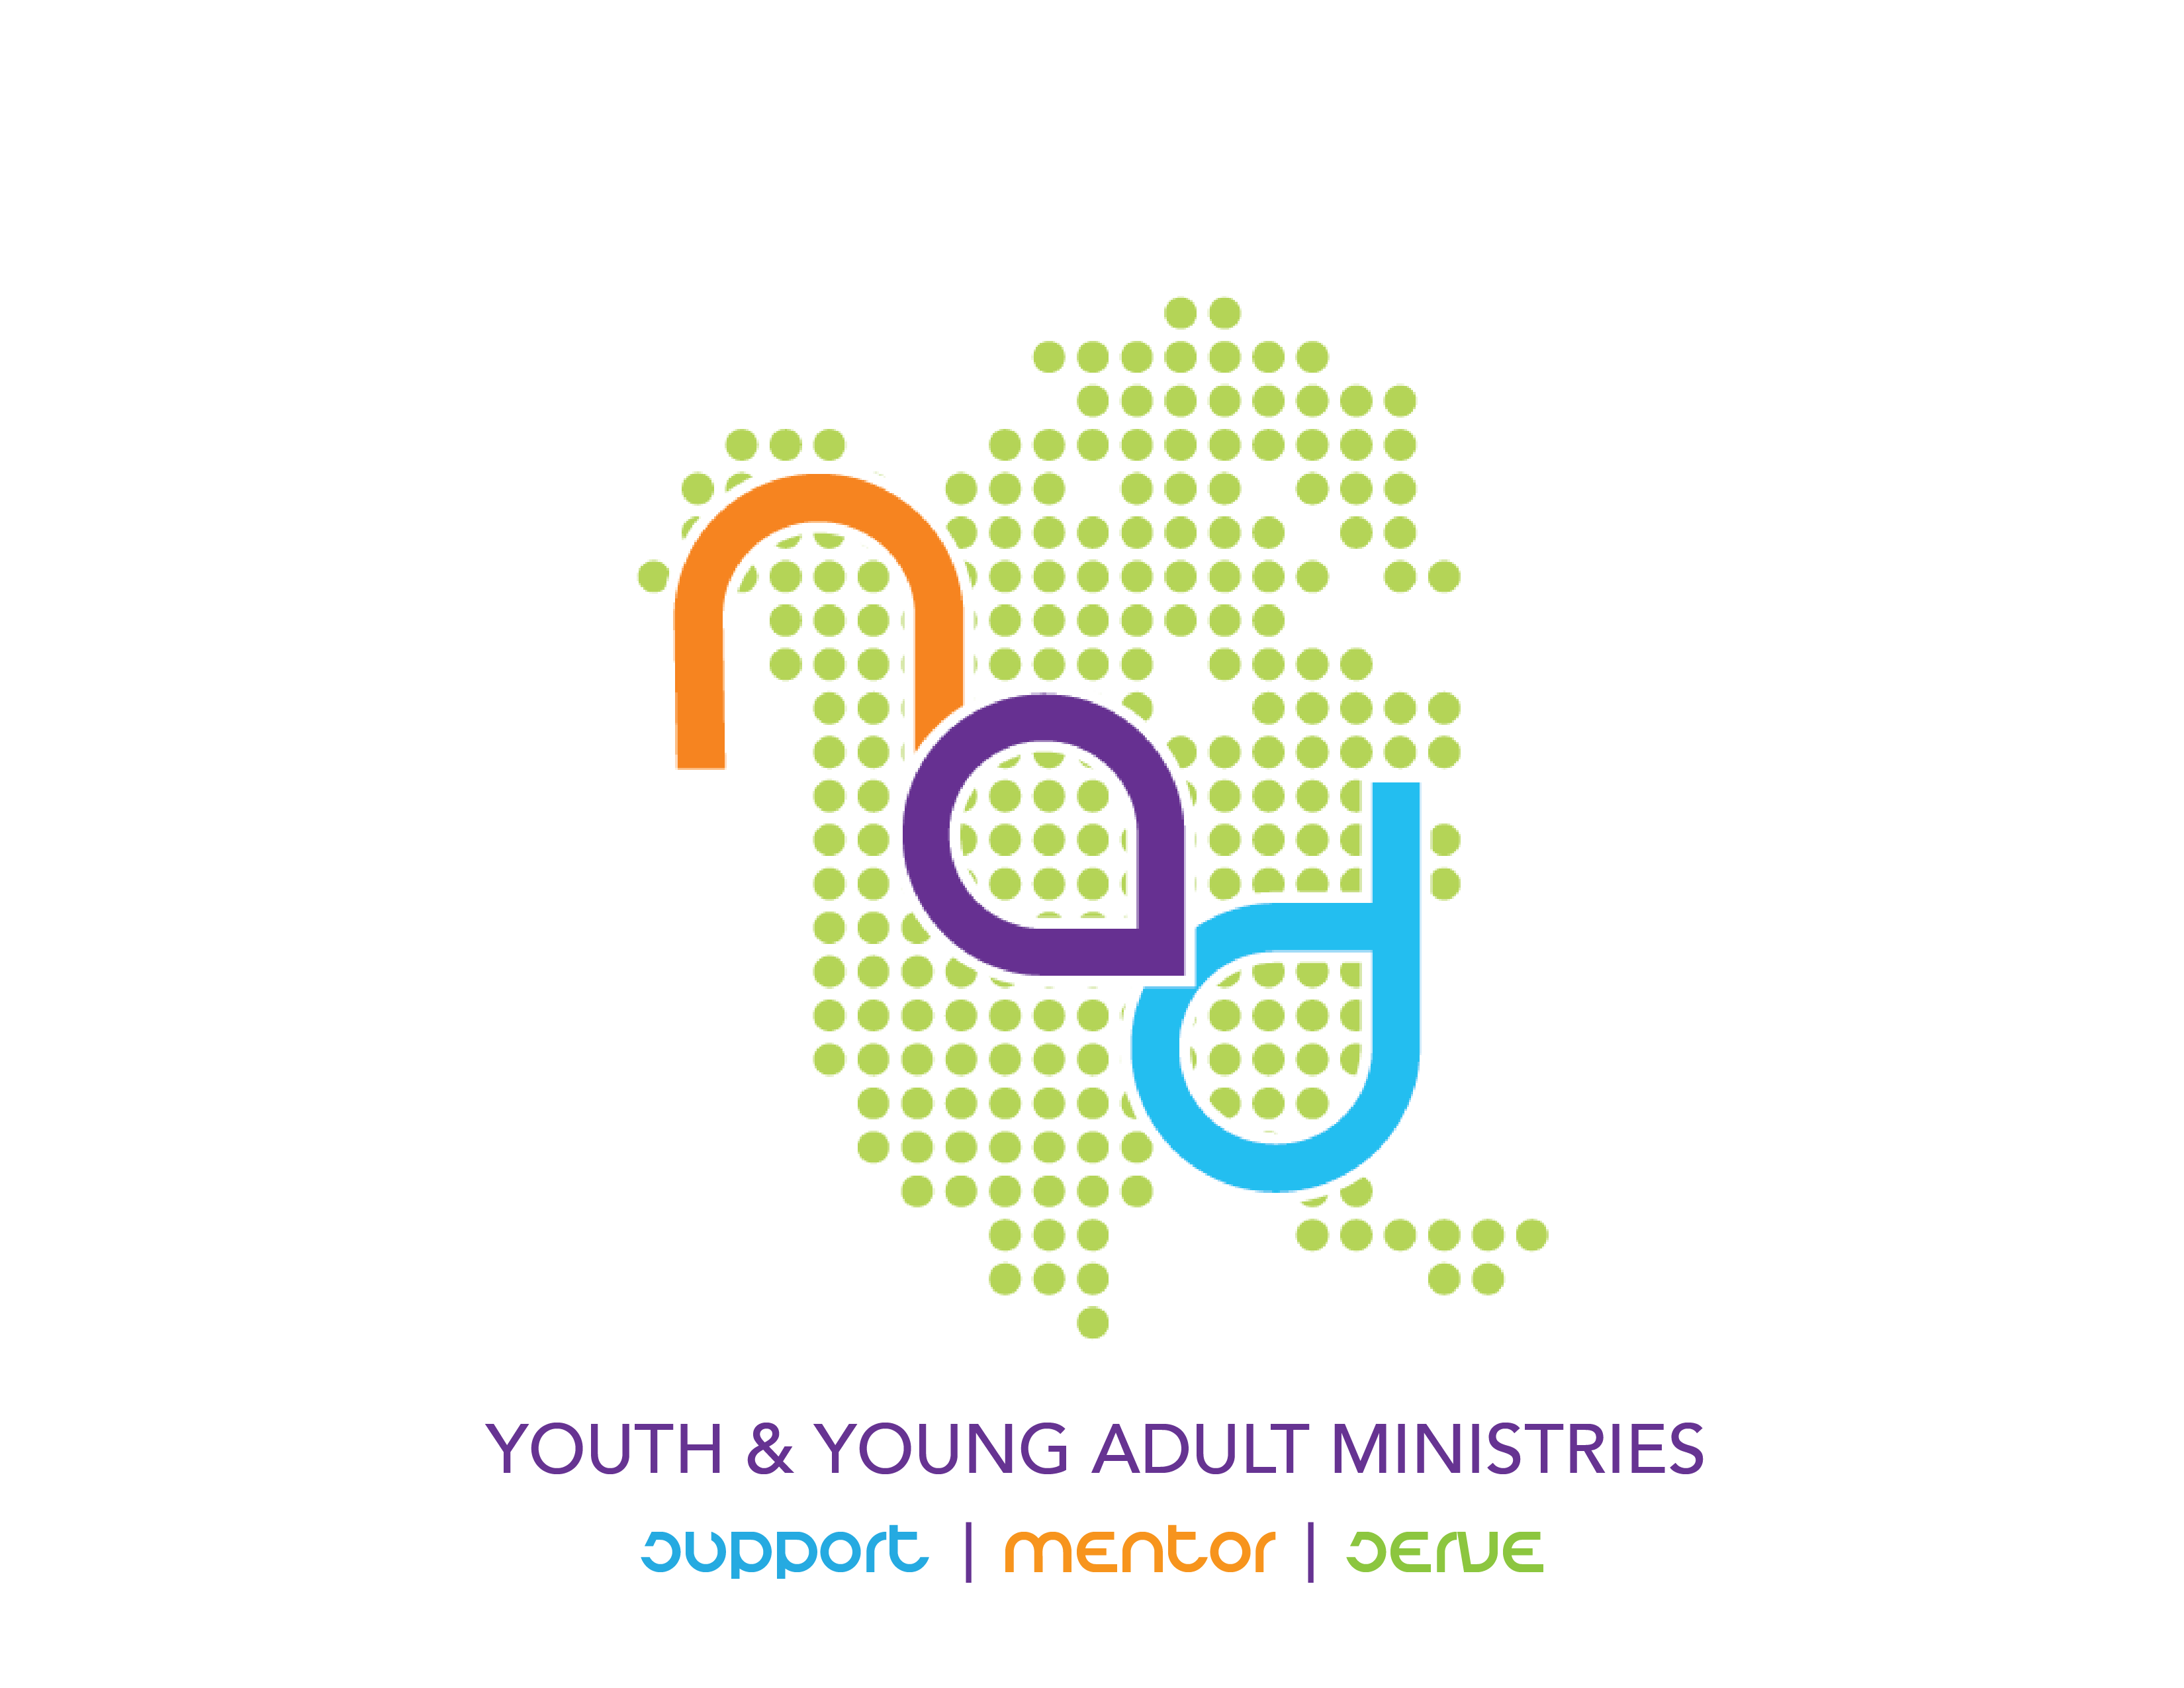 Logo of the North American Division Youth and Young Adult Ministries emphasizes support, mentorship, and service. Photo courtesy of NAD Youth and Young Adult Ministries